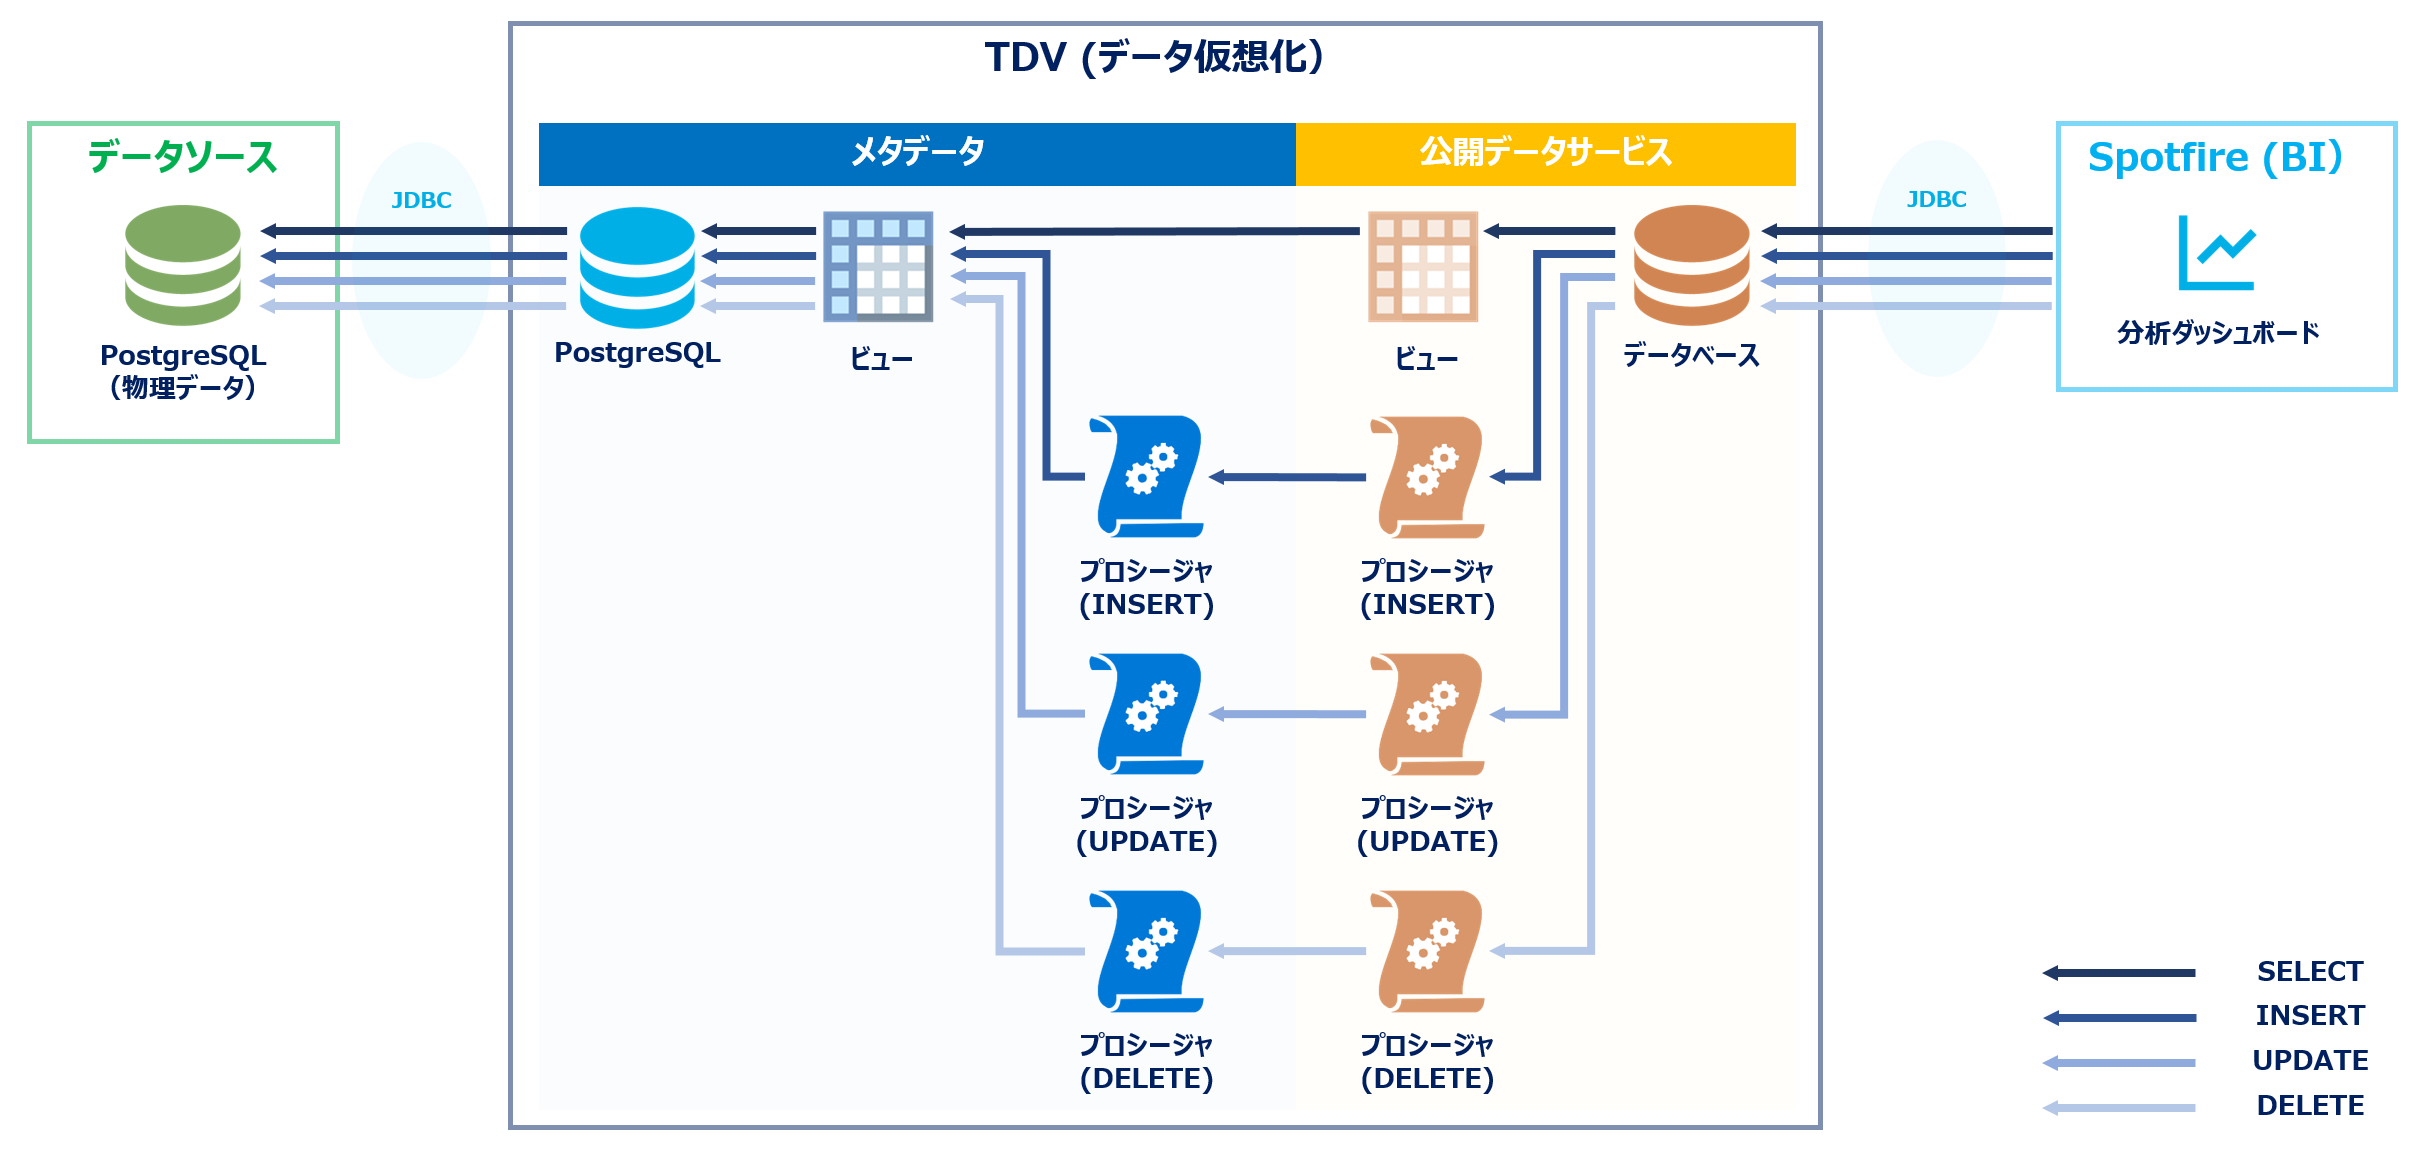 tdv-spotfire-il-overview.png